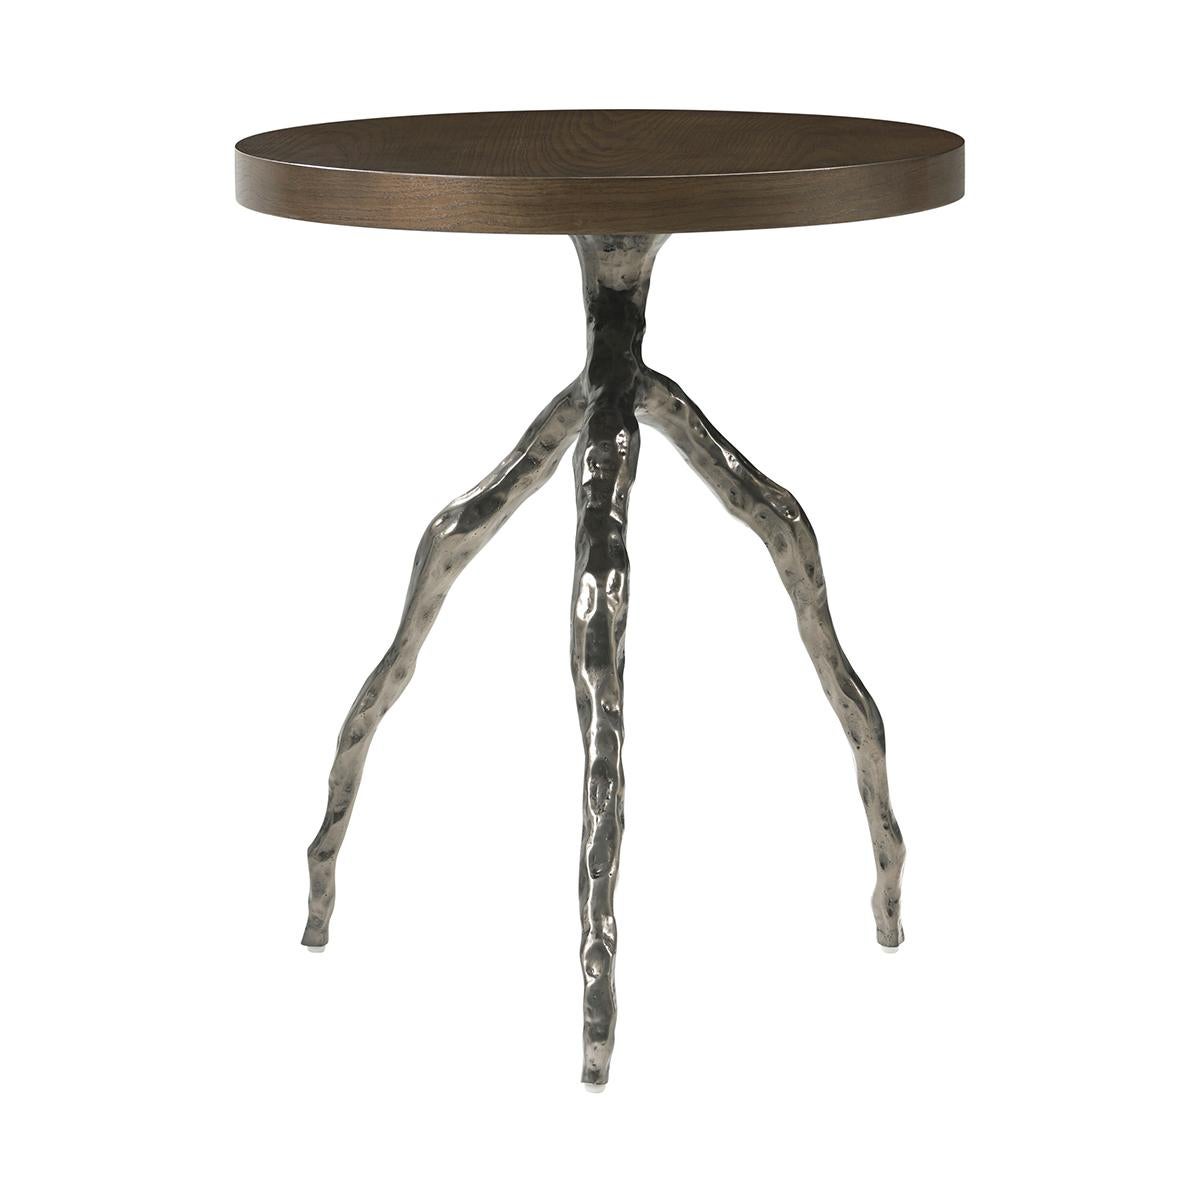 Organic Modern Modern Faux Bois Accent Table - Earth Finish For Sale